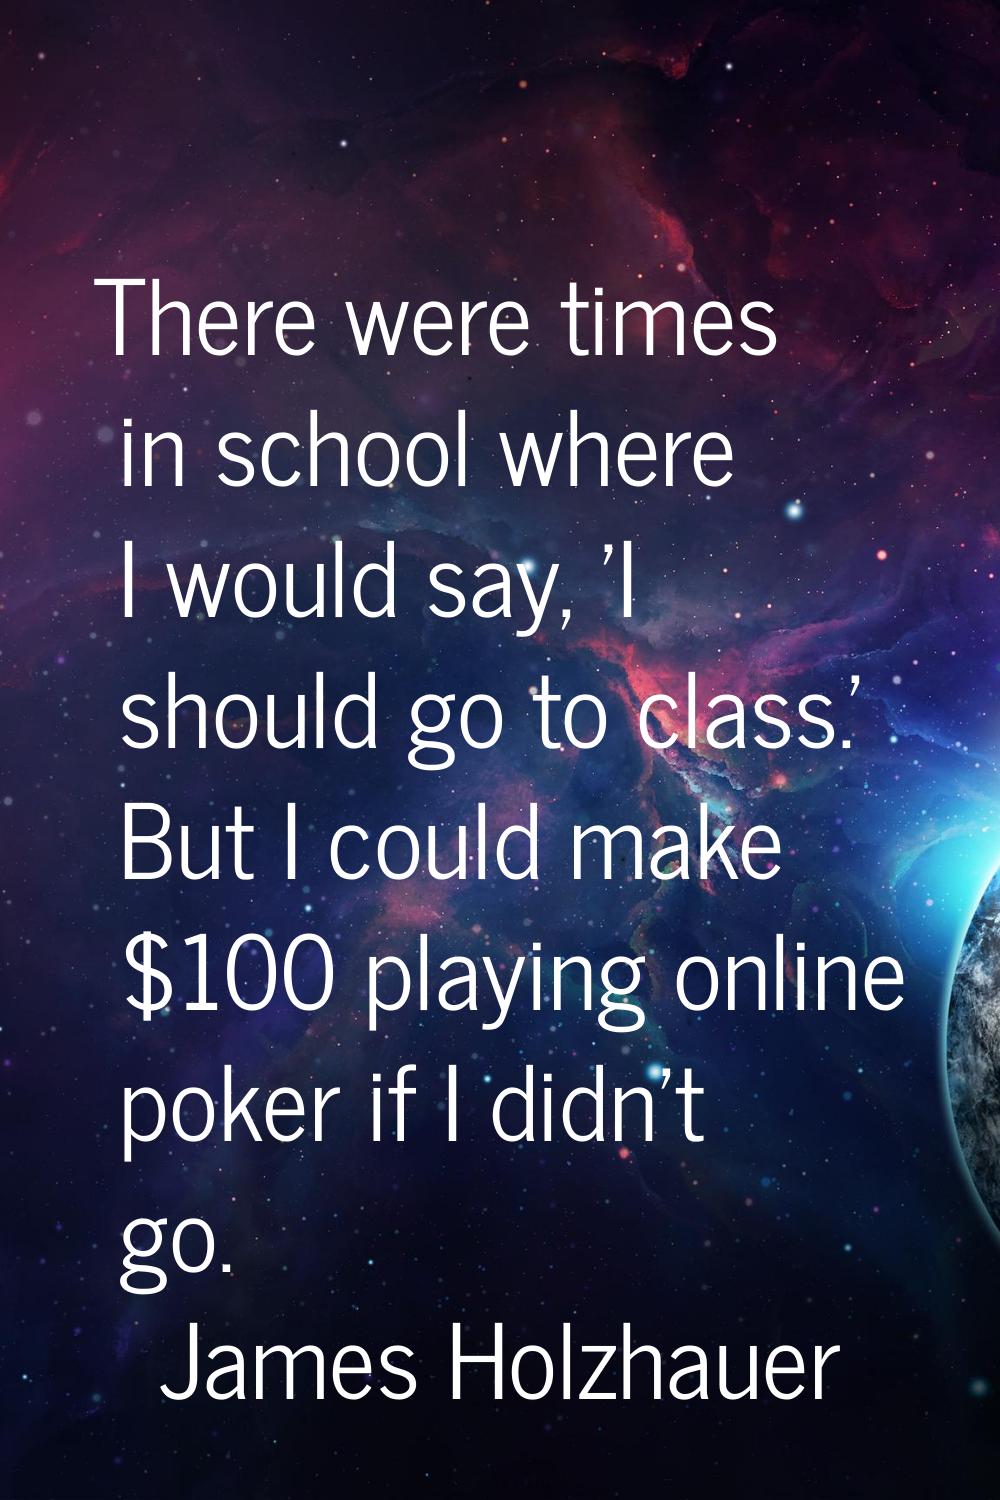 There were times in school where I would say, 'I should go to class.' But I could make $100 playing